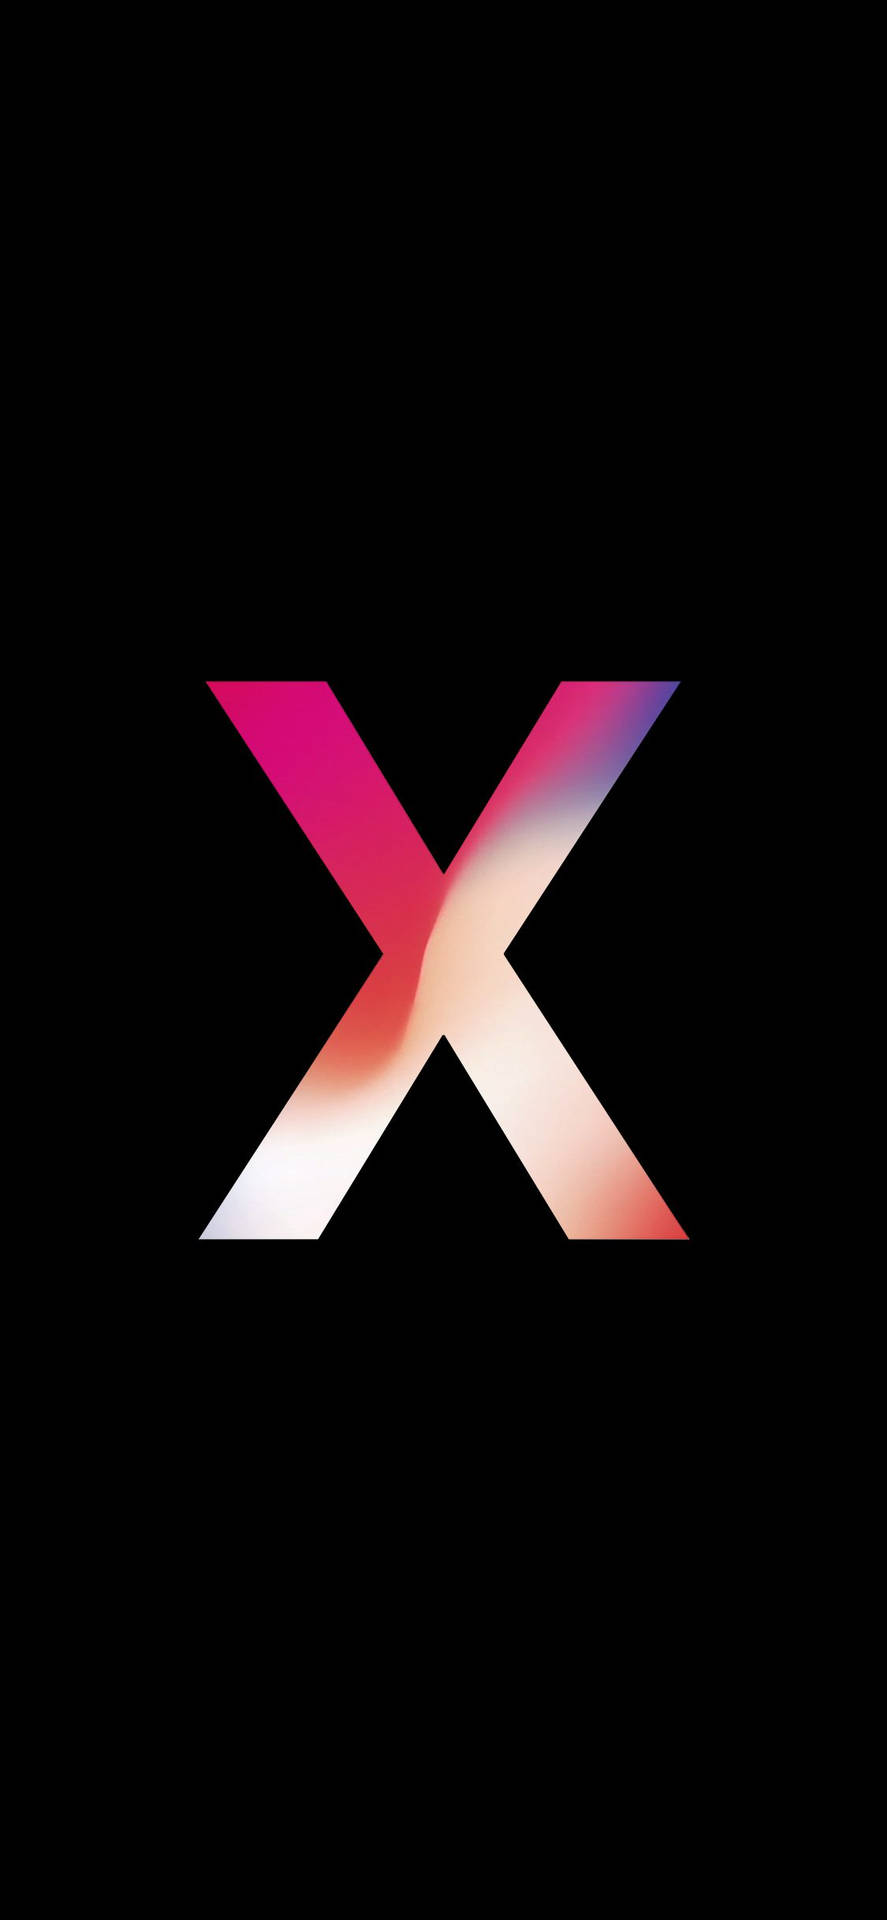 Xlogo Oled Iphone-cover Wallpaper